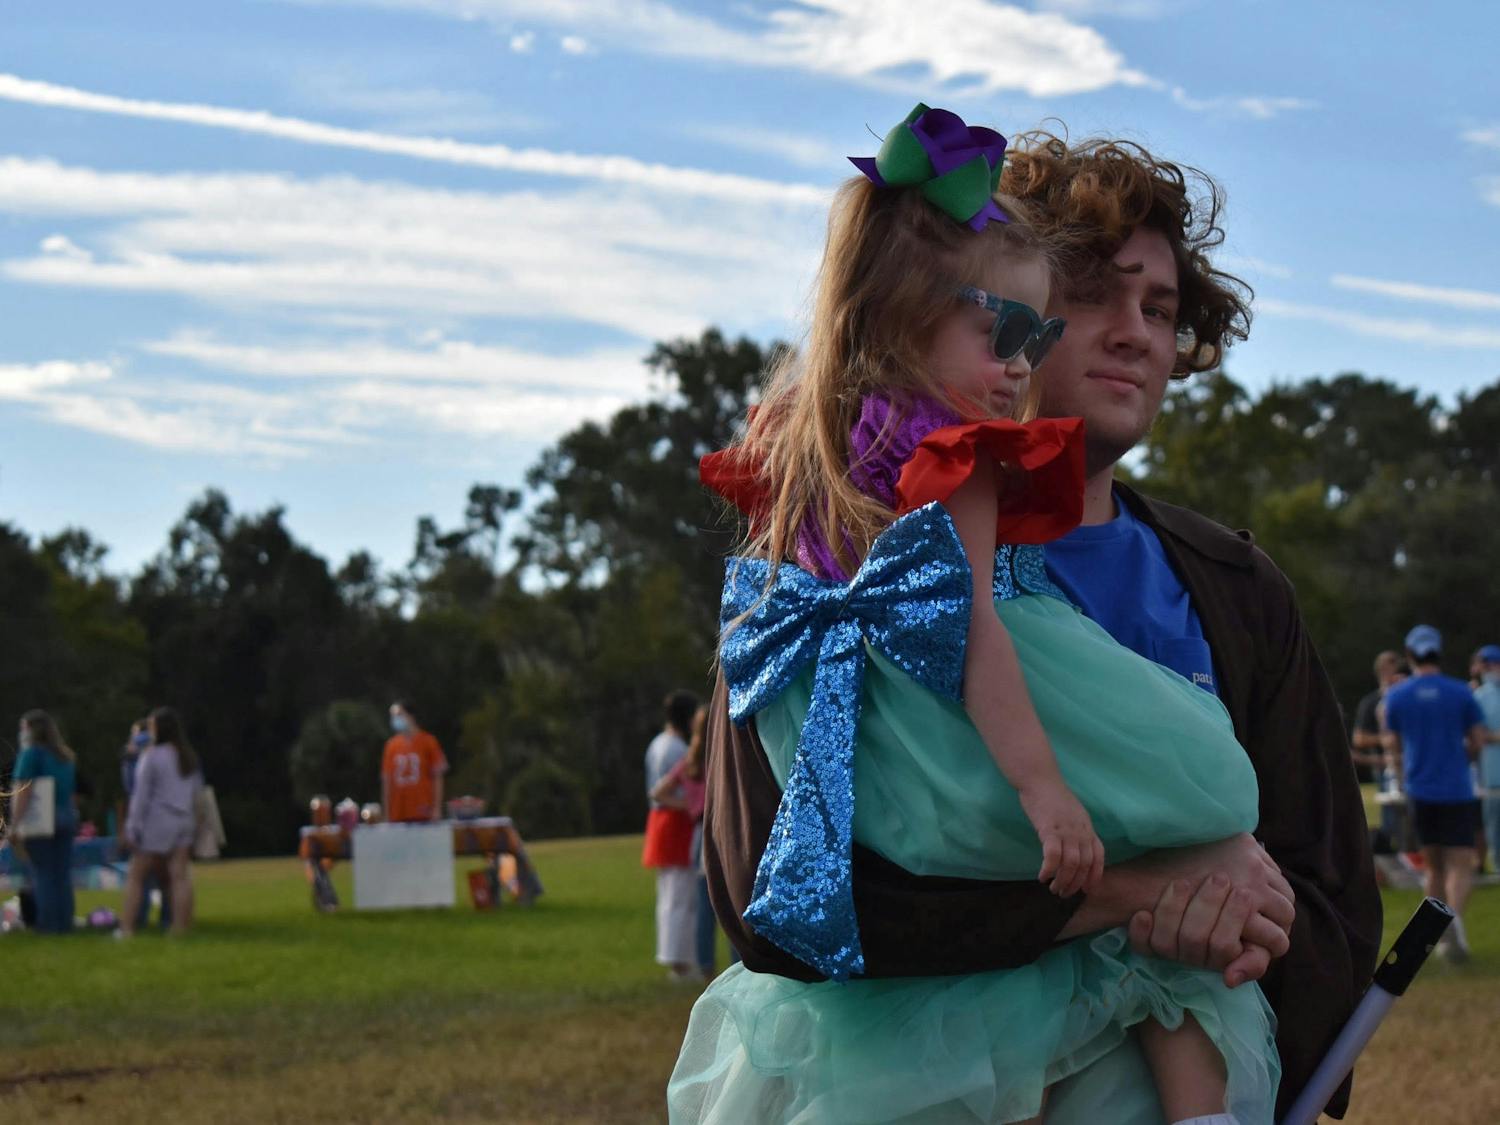 Hannah Strickland, 5, surveys the festivities in her Princess Ariel costume during Dance Marathon at UF's Moralloween event at Flavet Field on Wednesday, Oct. 27, 2021. 